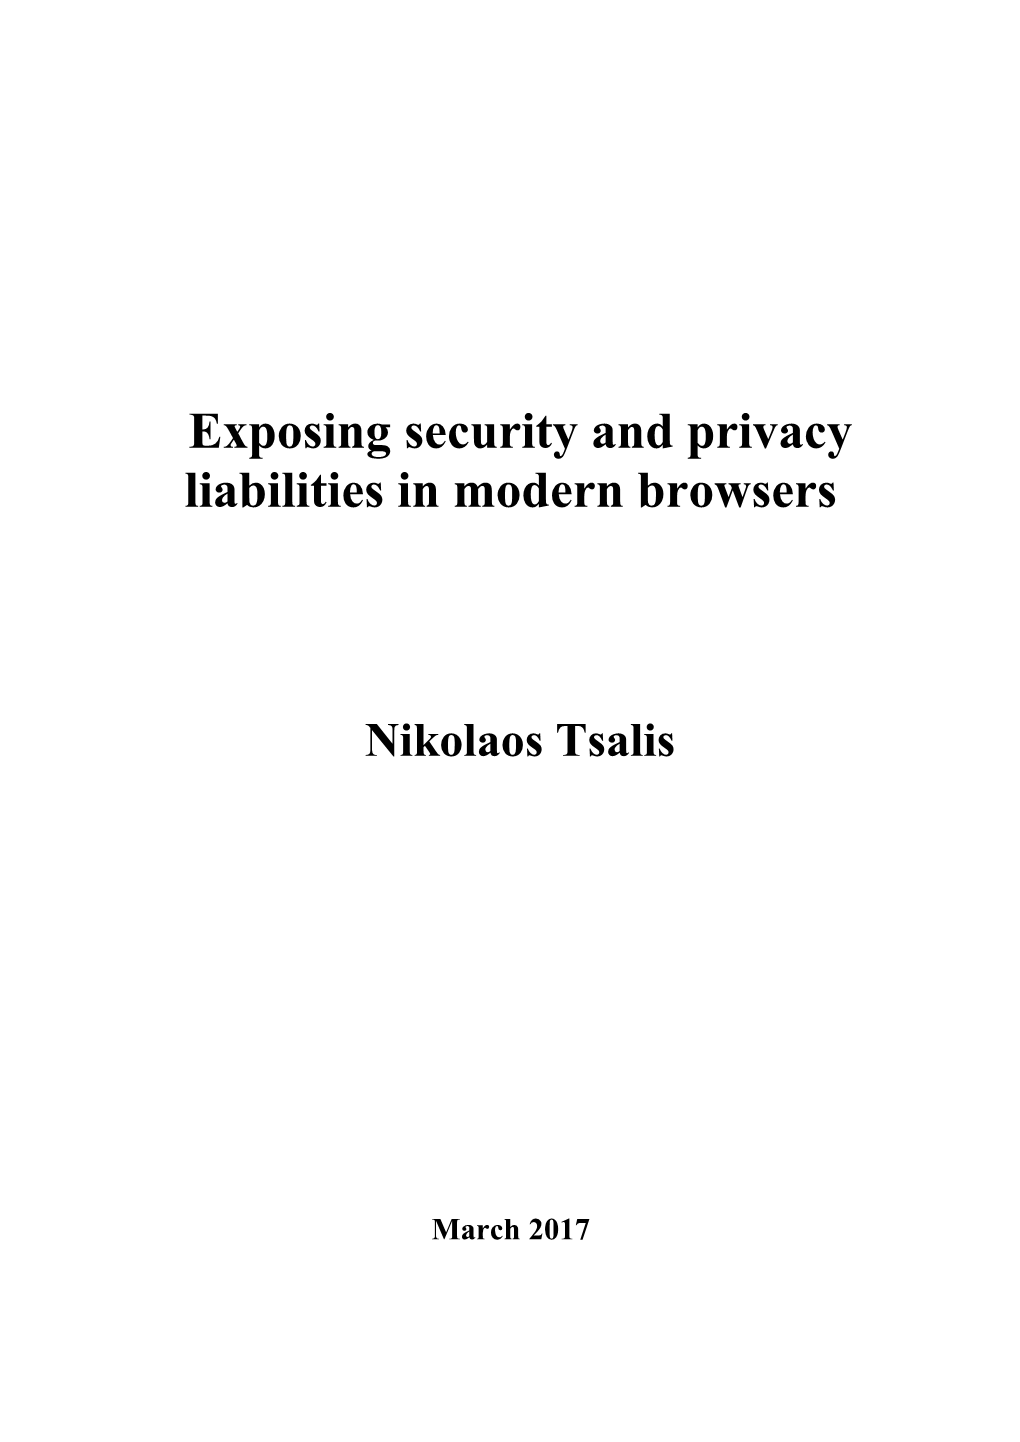 Exposing Security and Privacy Liabilities in Modern Browsers